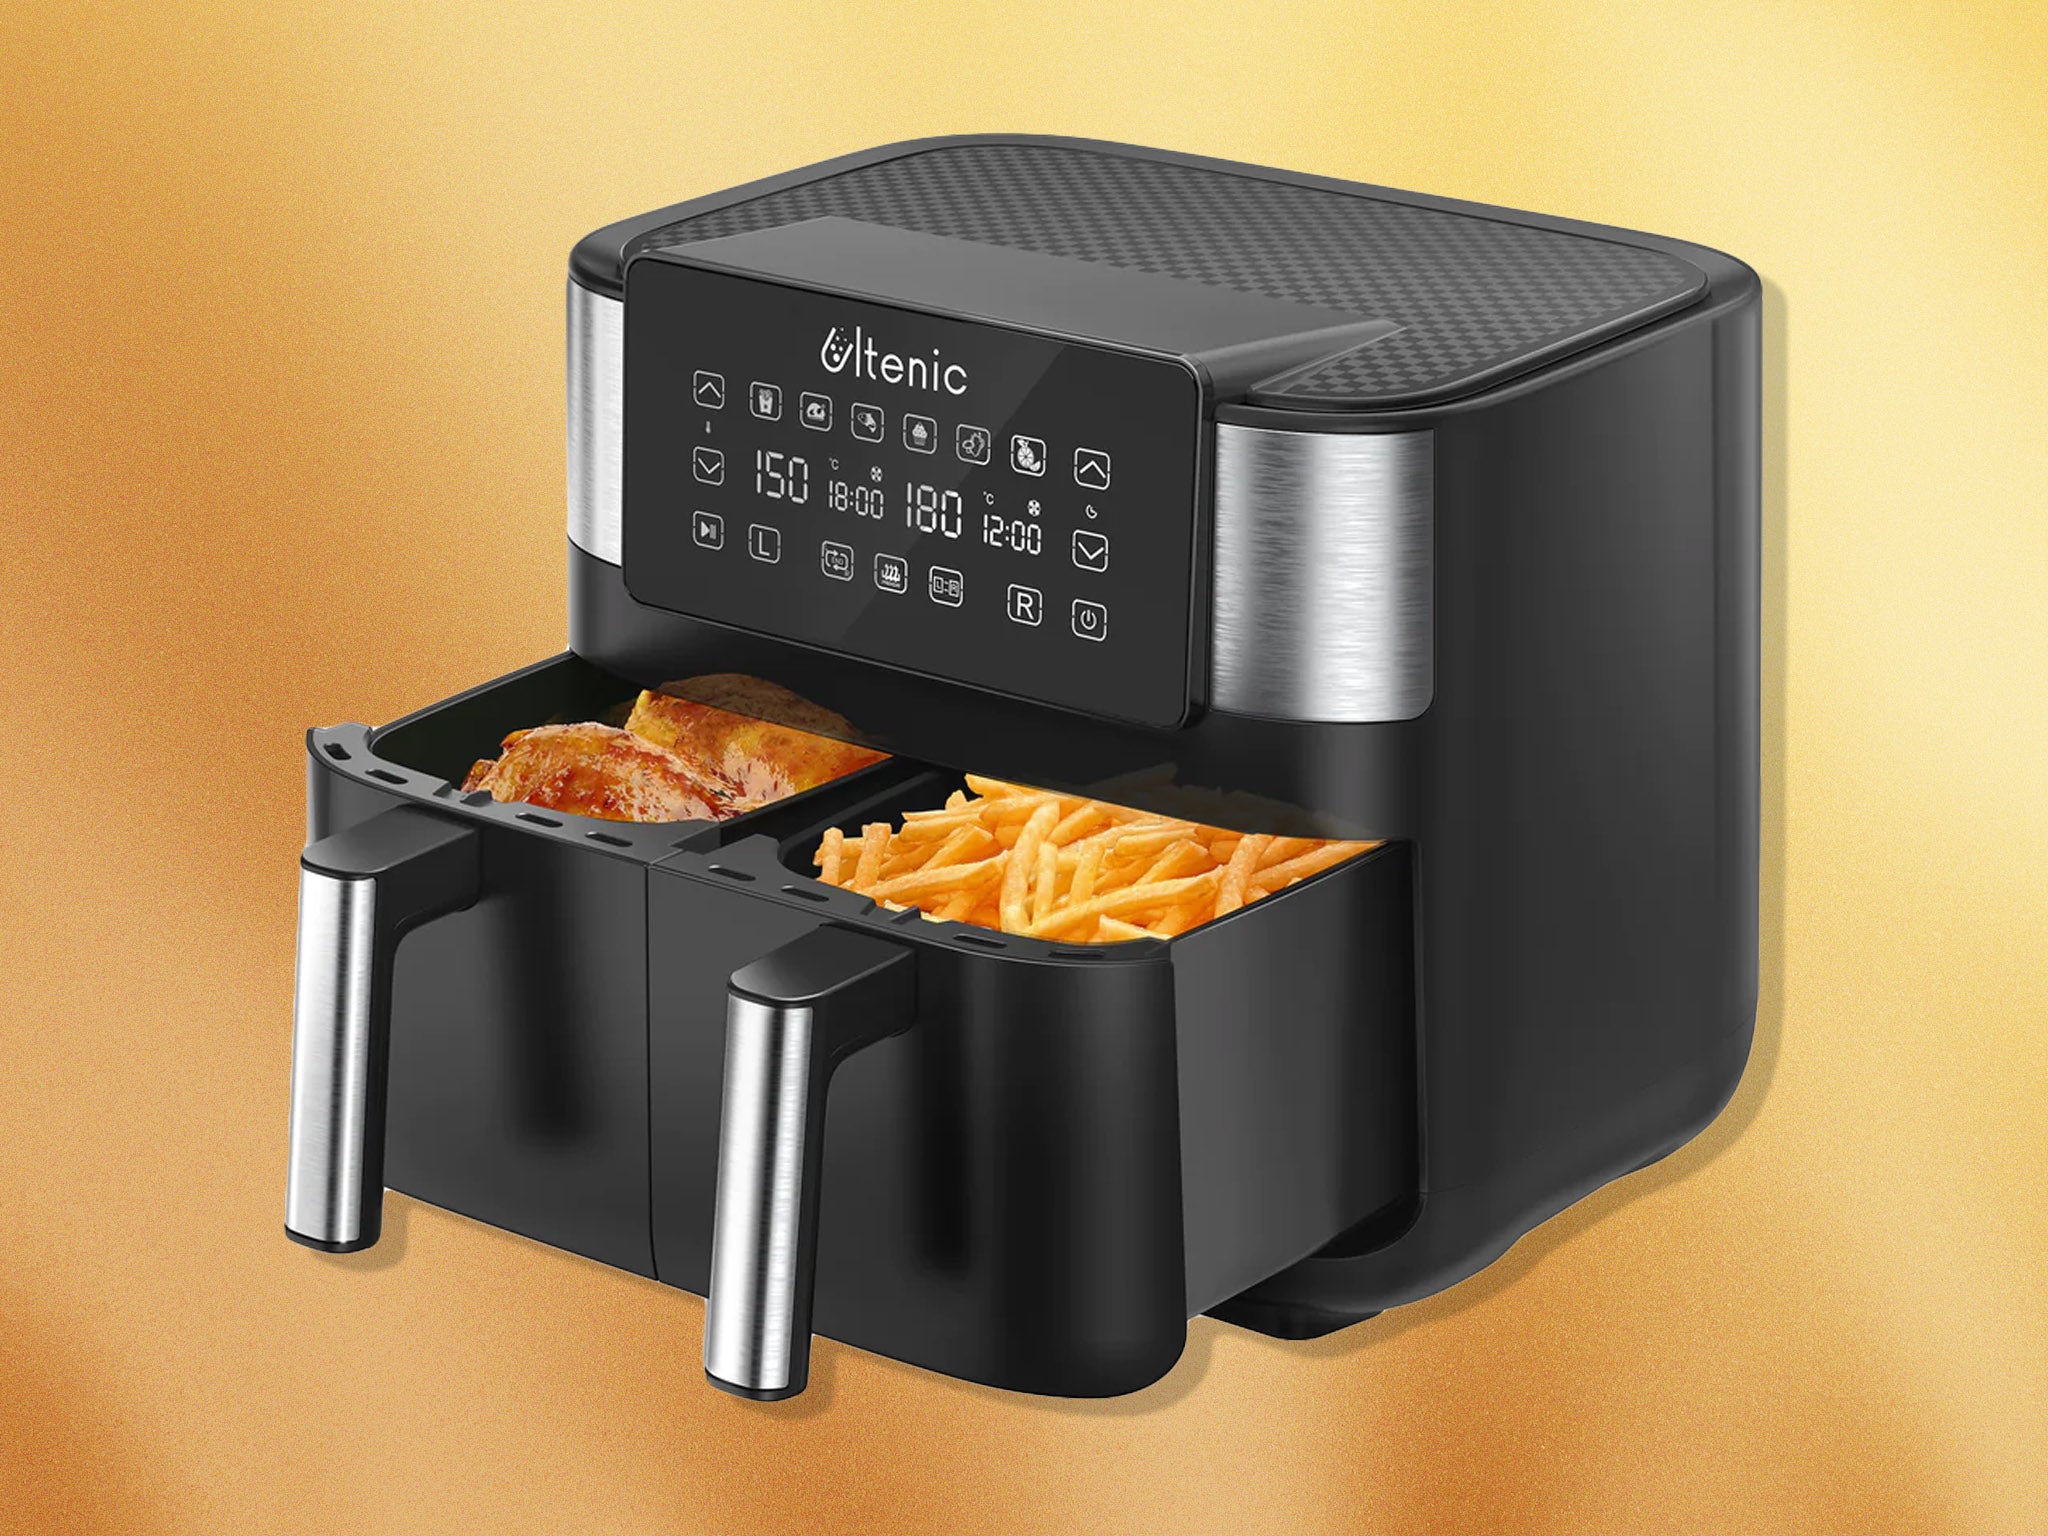 We’ve used this air fryer to cook everything from chicken nuggets and chips to butternut squash and burgers